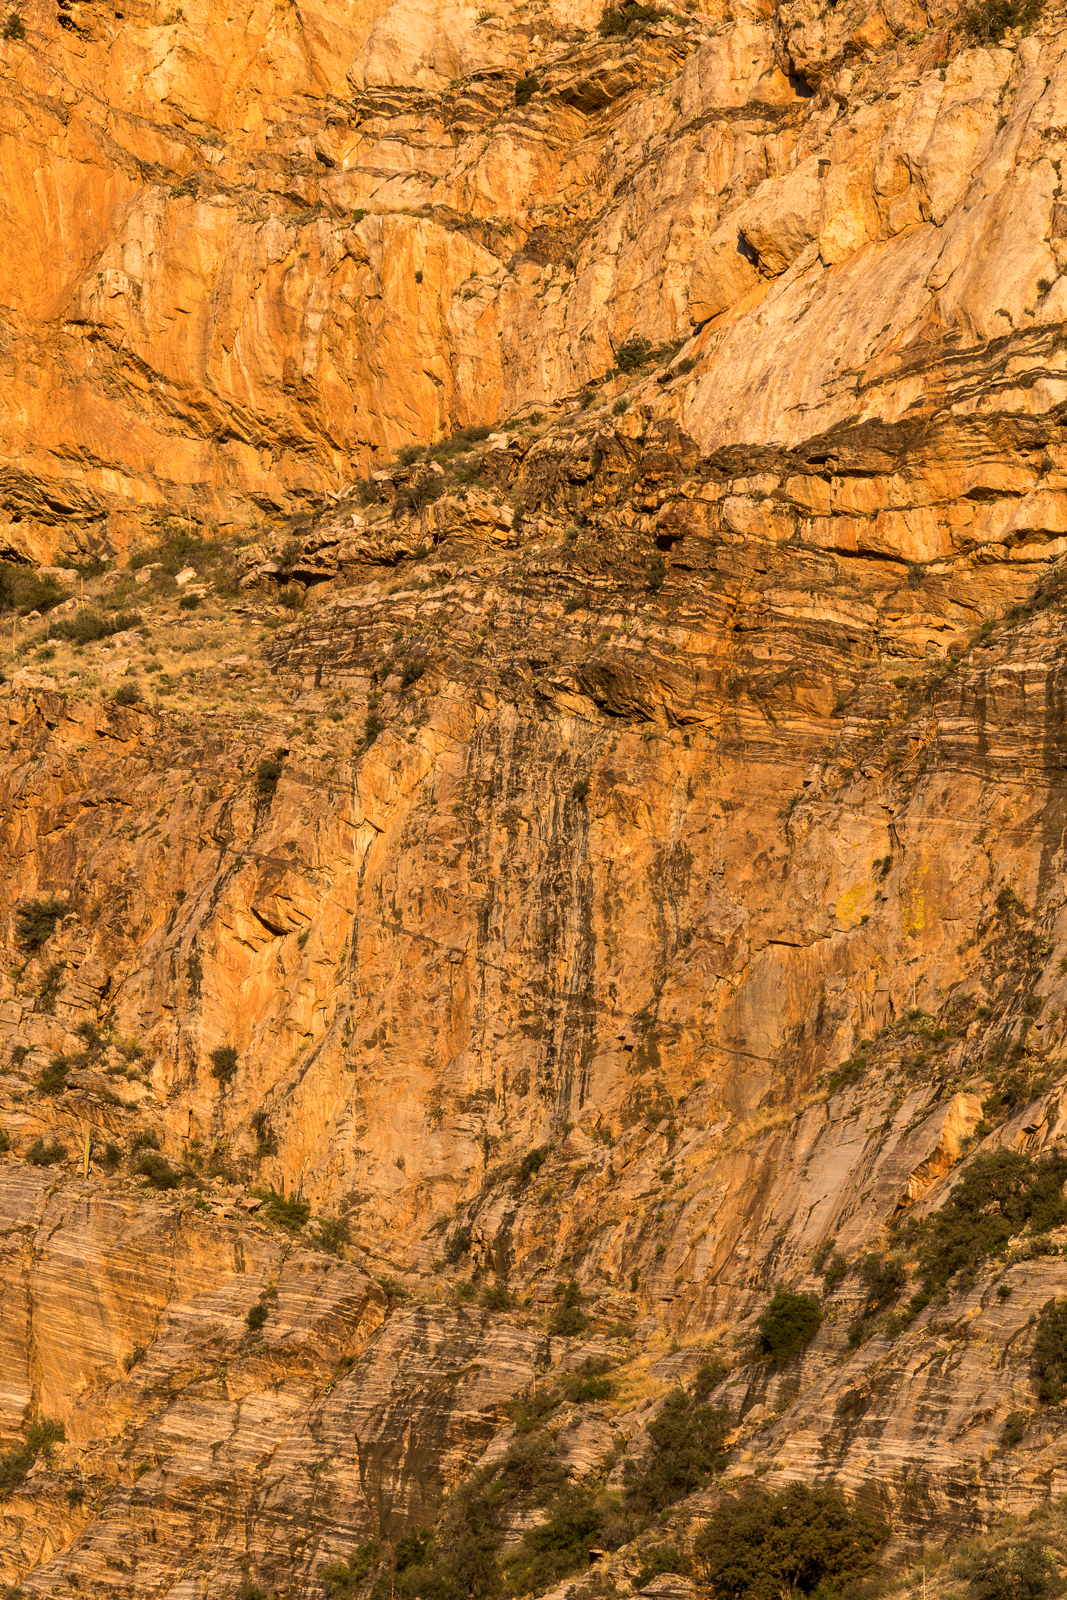 A section of the Pontatoc Ridge Cliffs. March 2016.